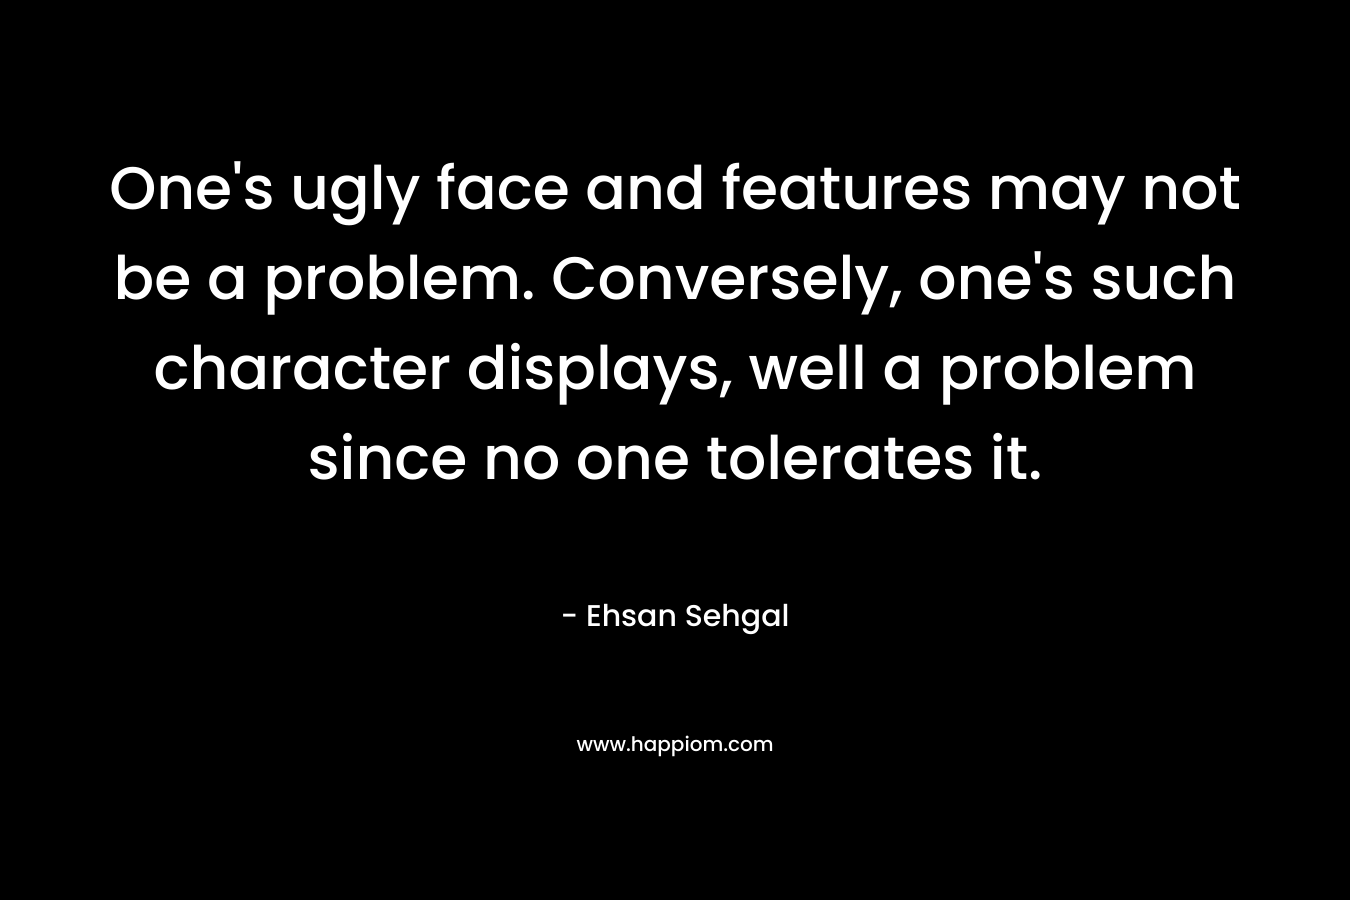 One's ugly face and features may not be a problem. Conversely, one's such character displays, well a problem since no one tolerates it.